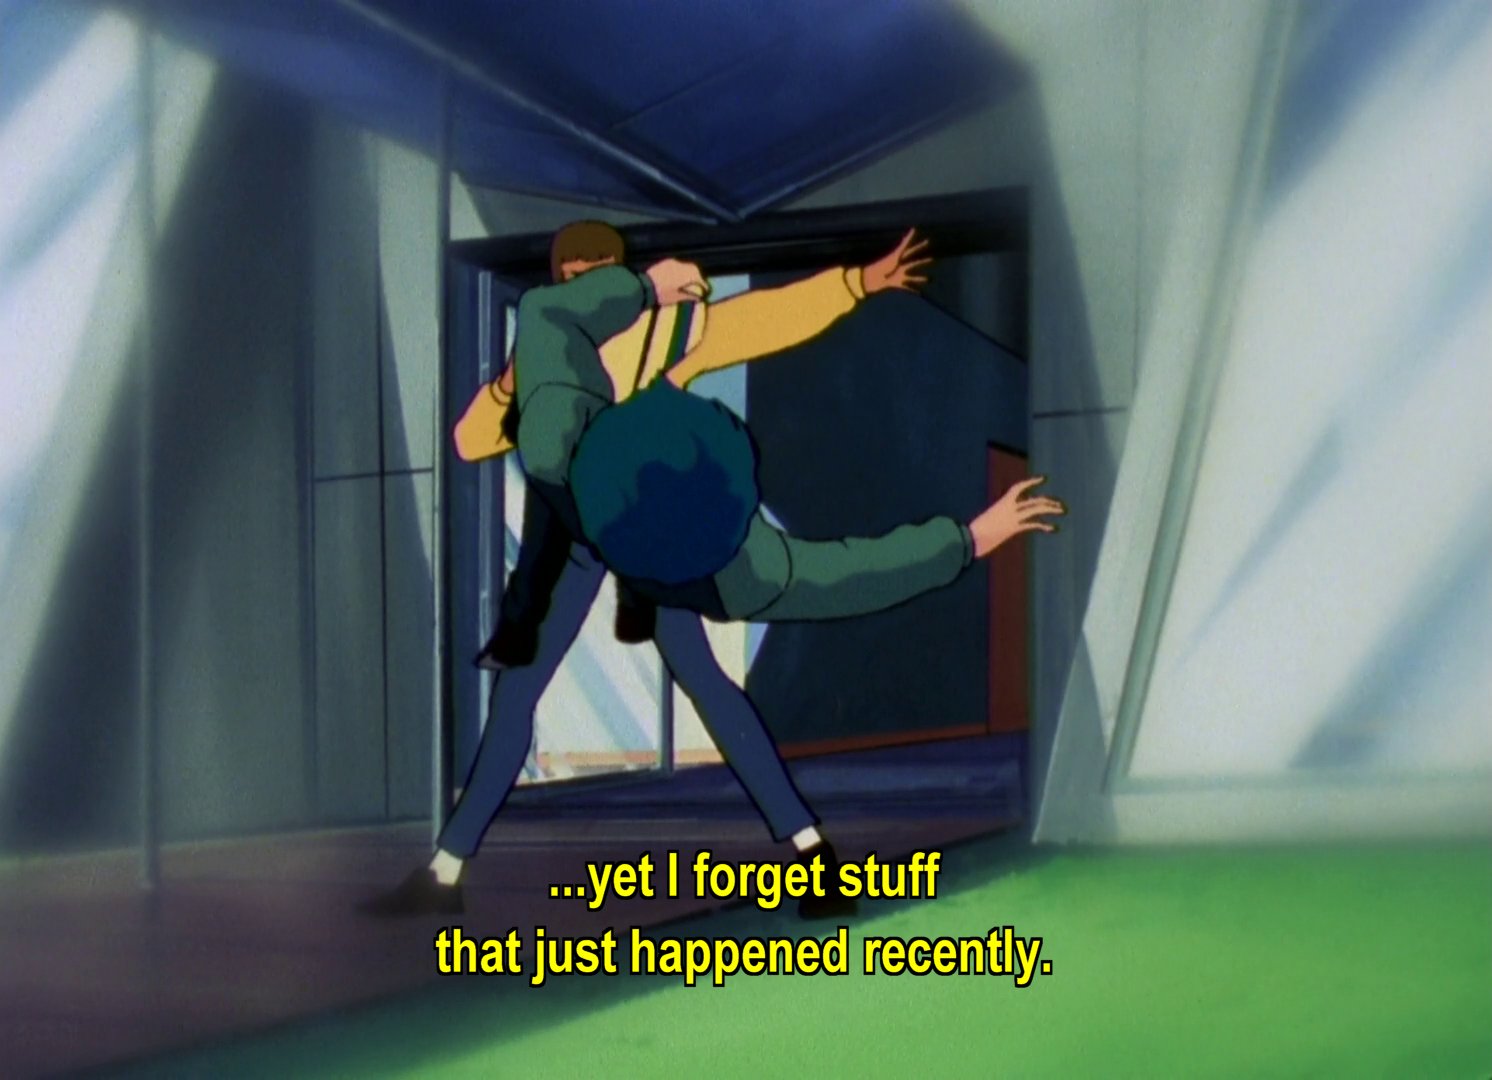 Kamille getting thrown across the room in a flashback: yet I forget stuff that just happened recently.